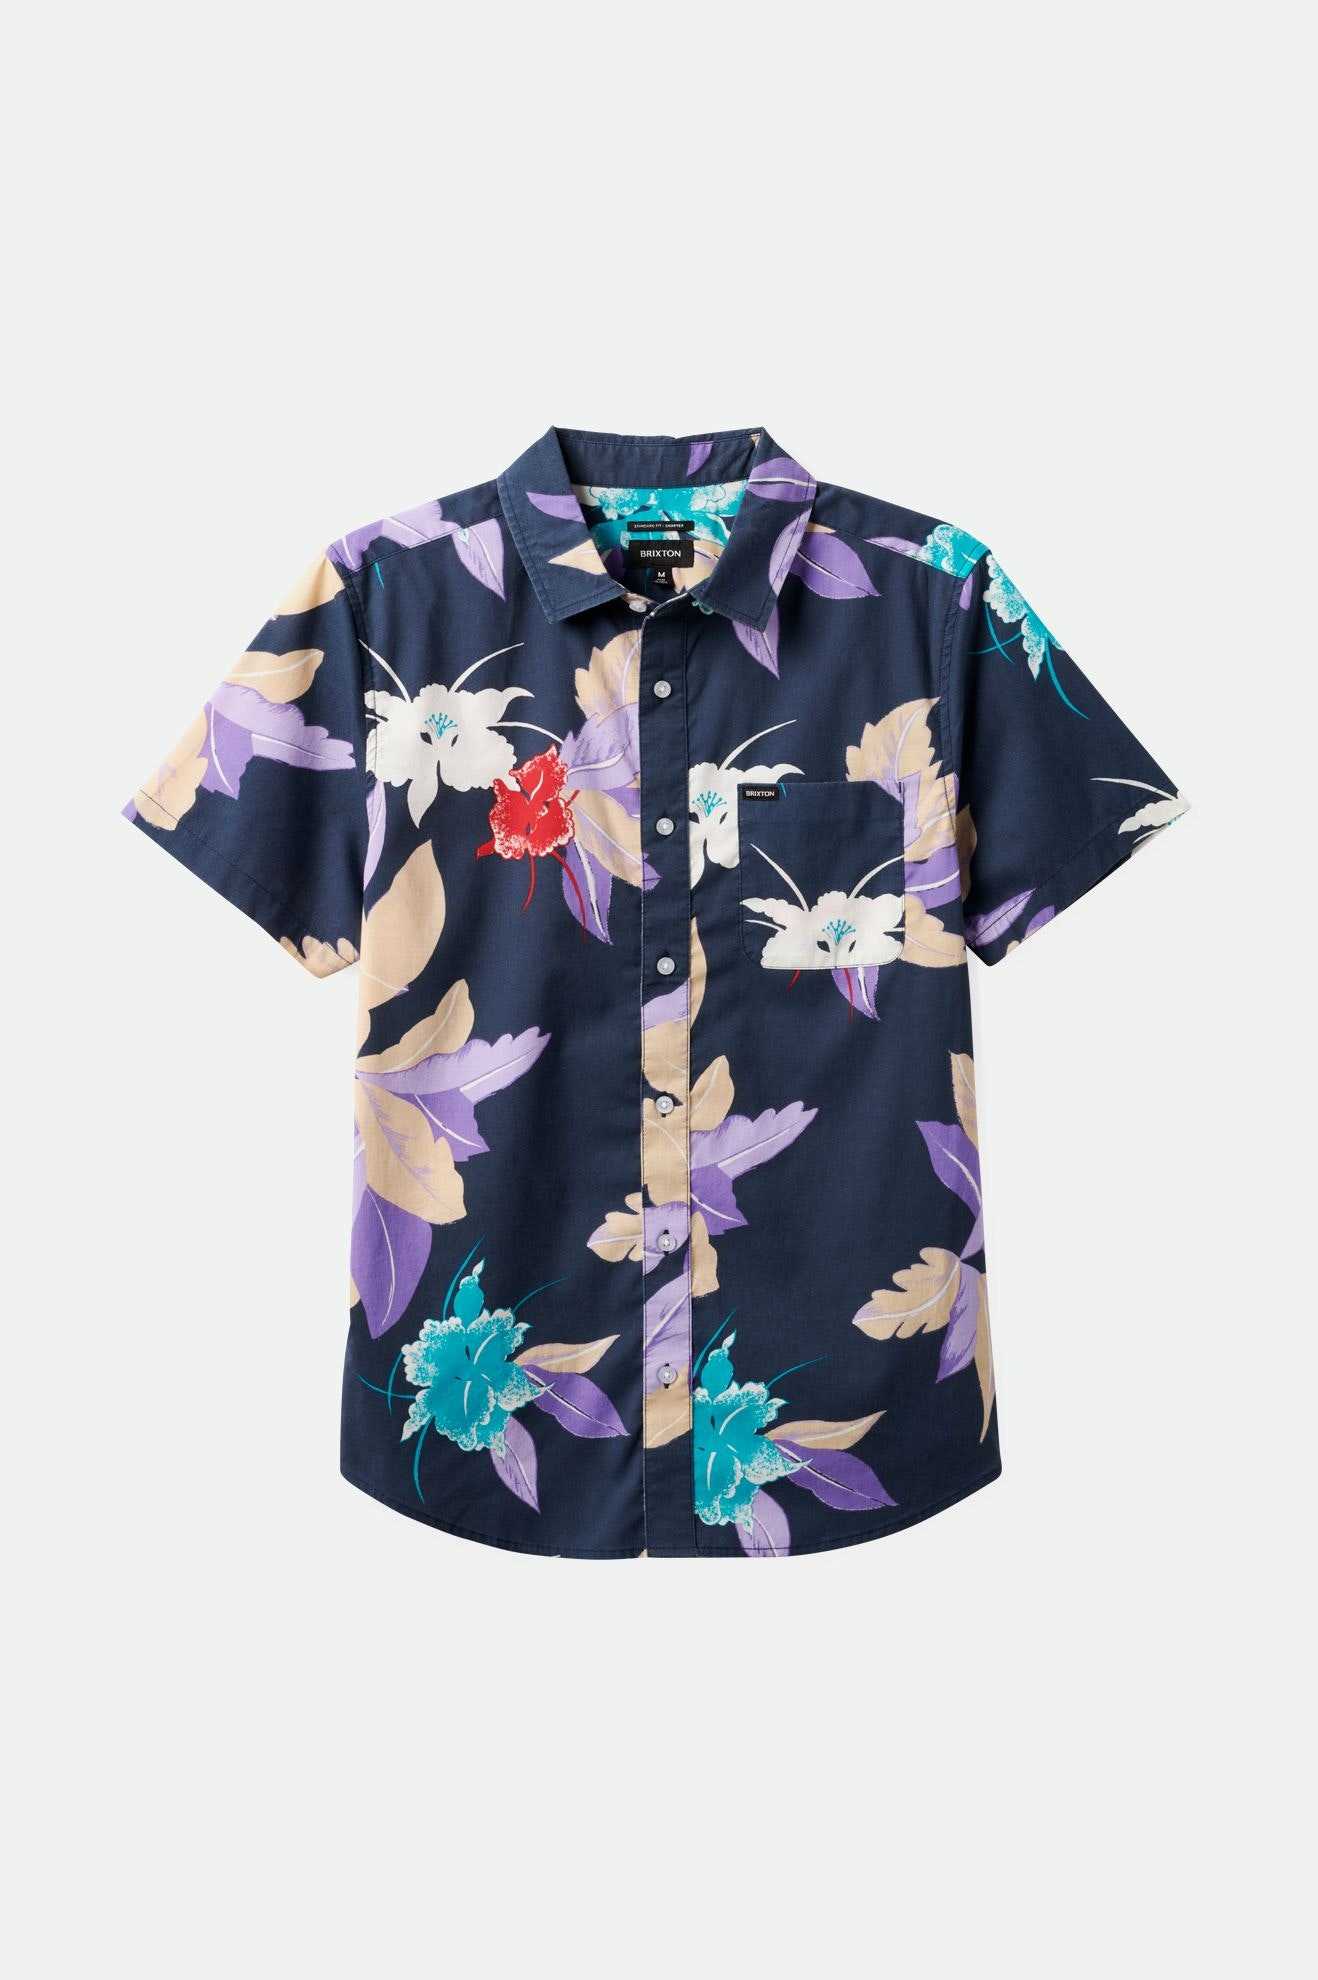 Brixton Men's Charter Print S/S Shirt - Washed Navy Passion | Profile